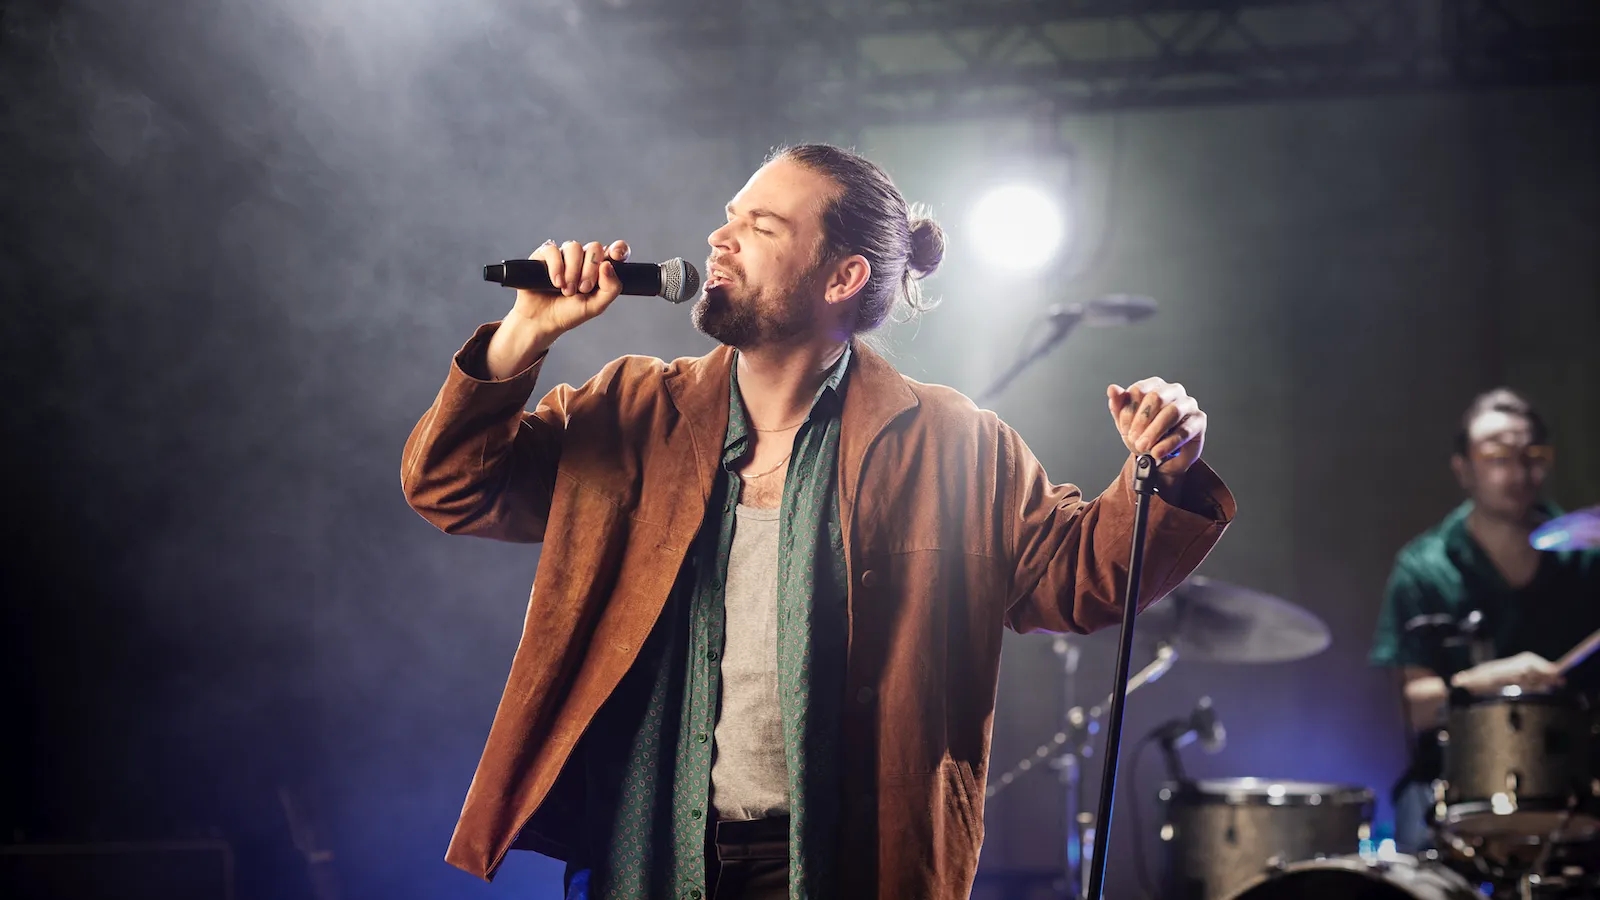 A male singer with a man bun using a wireless SM58 mic